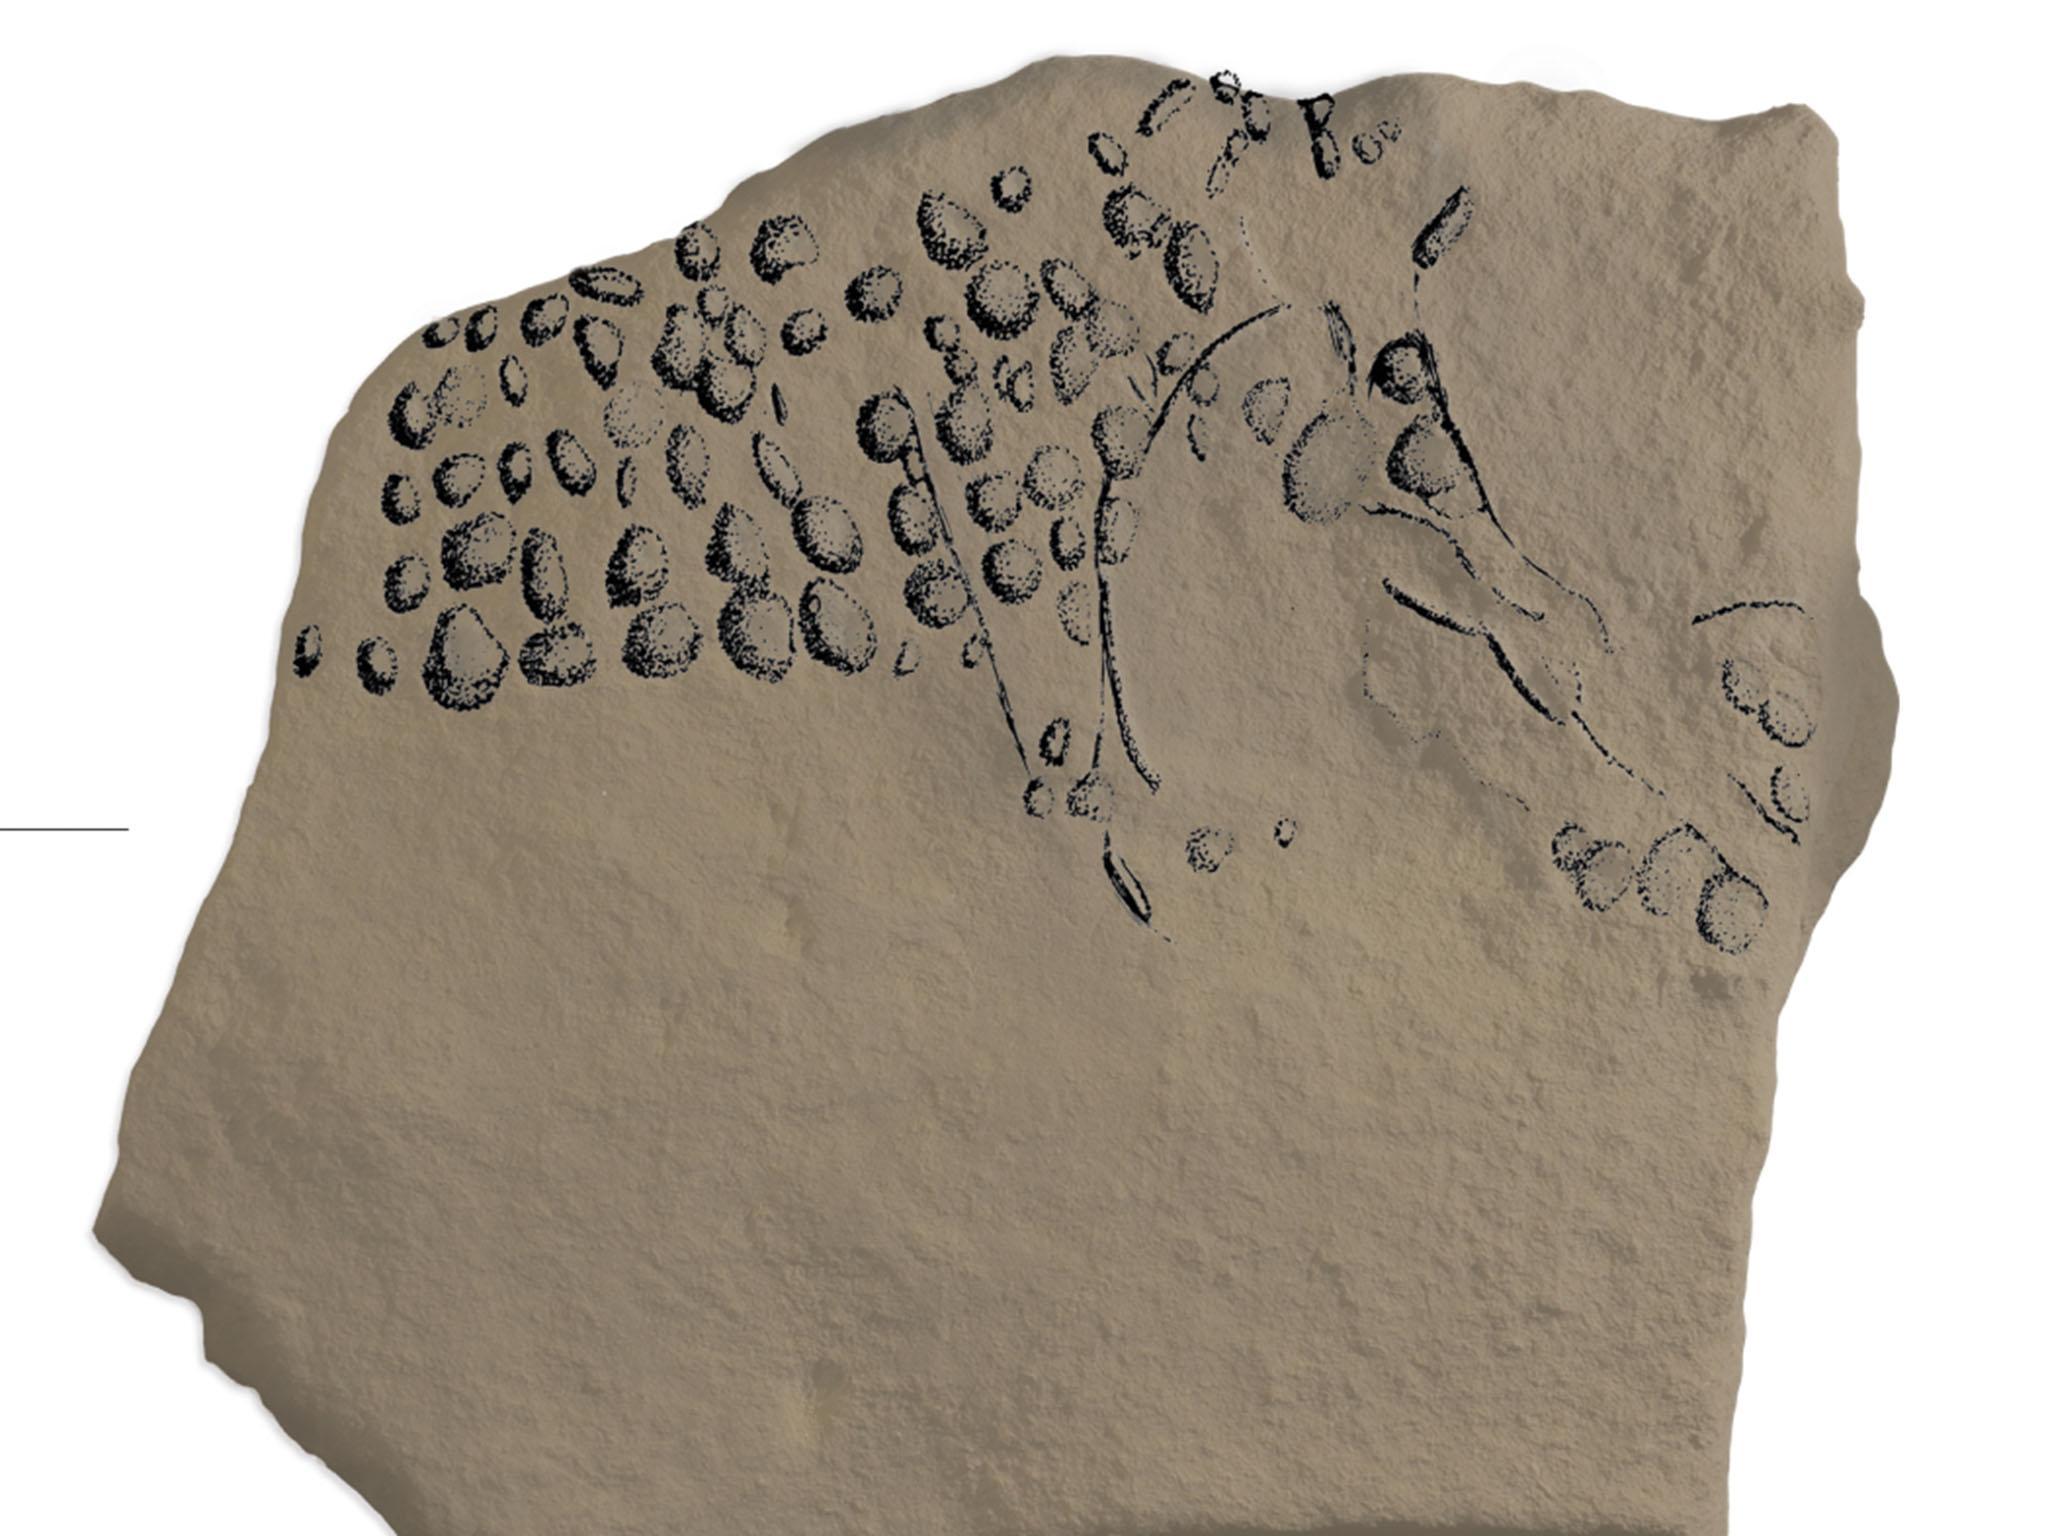 A drawing of the engraved stone highlights the individual pixels that make up a mammoth, or auroch, facing right